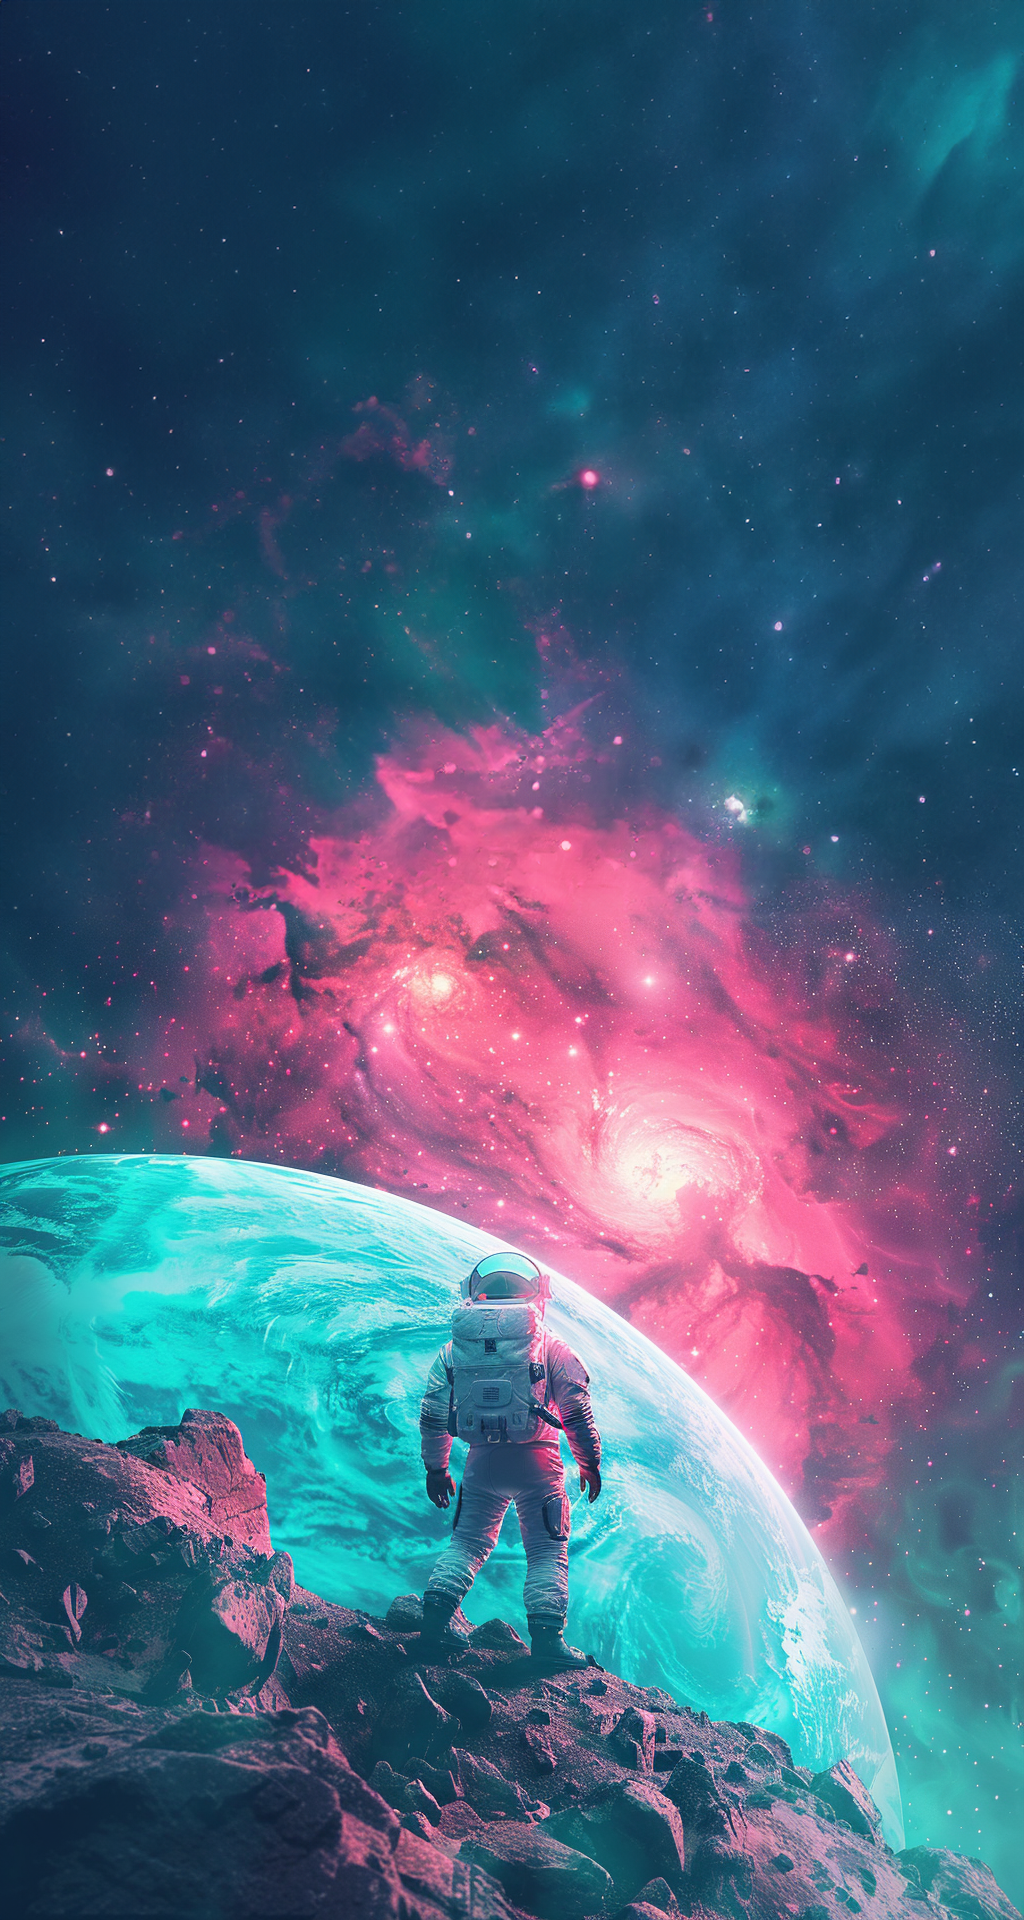 astronaut looking up at the galaxy on a fantasy planet, space, fantasy, science fiction